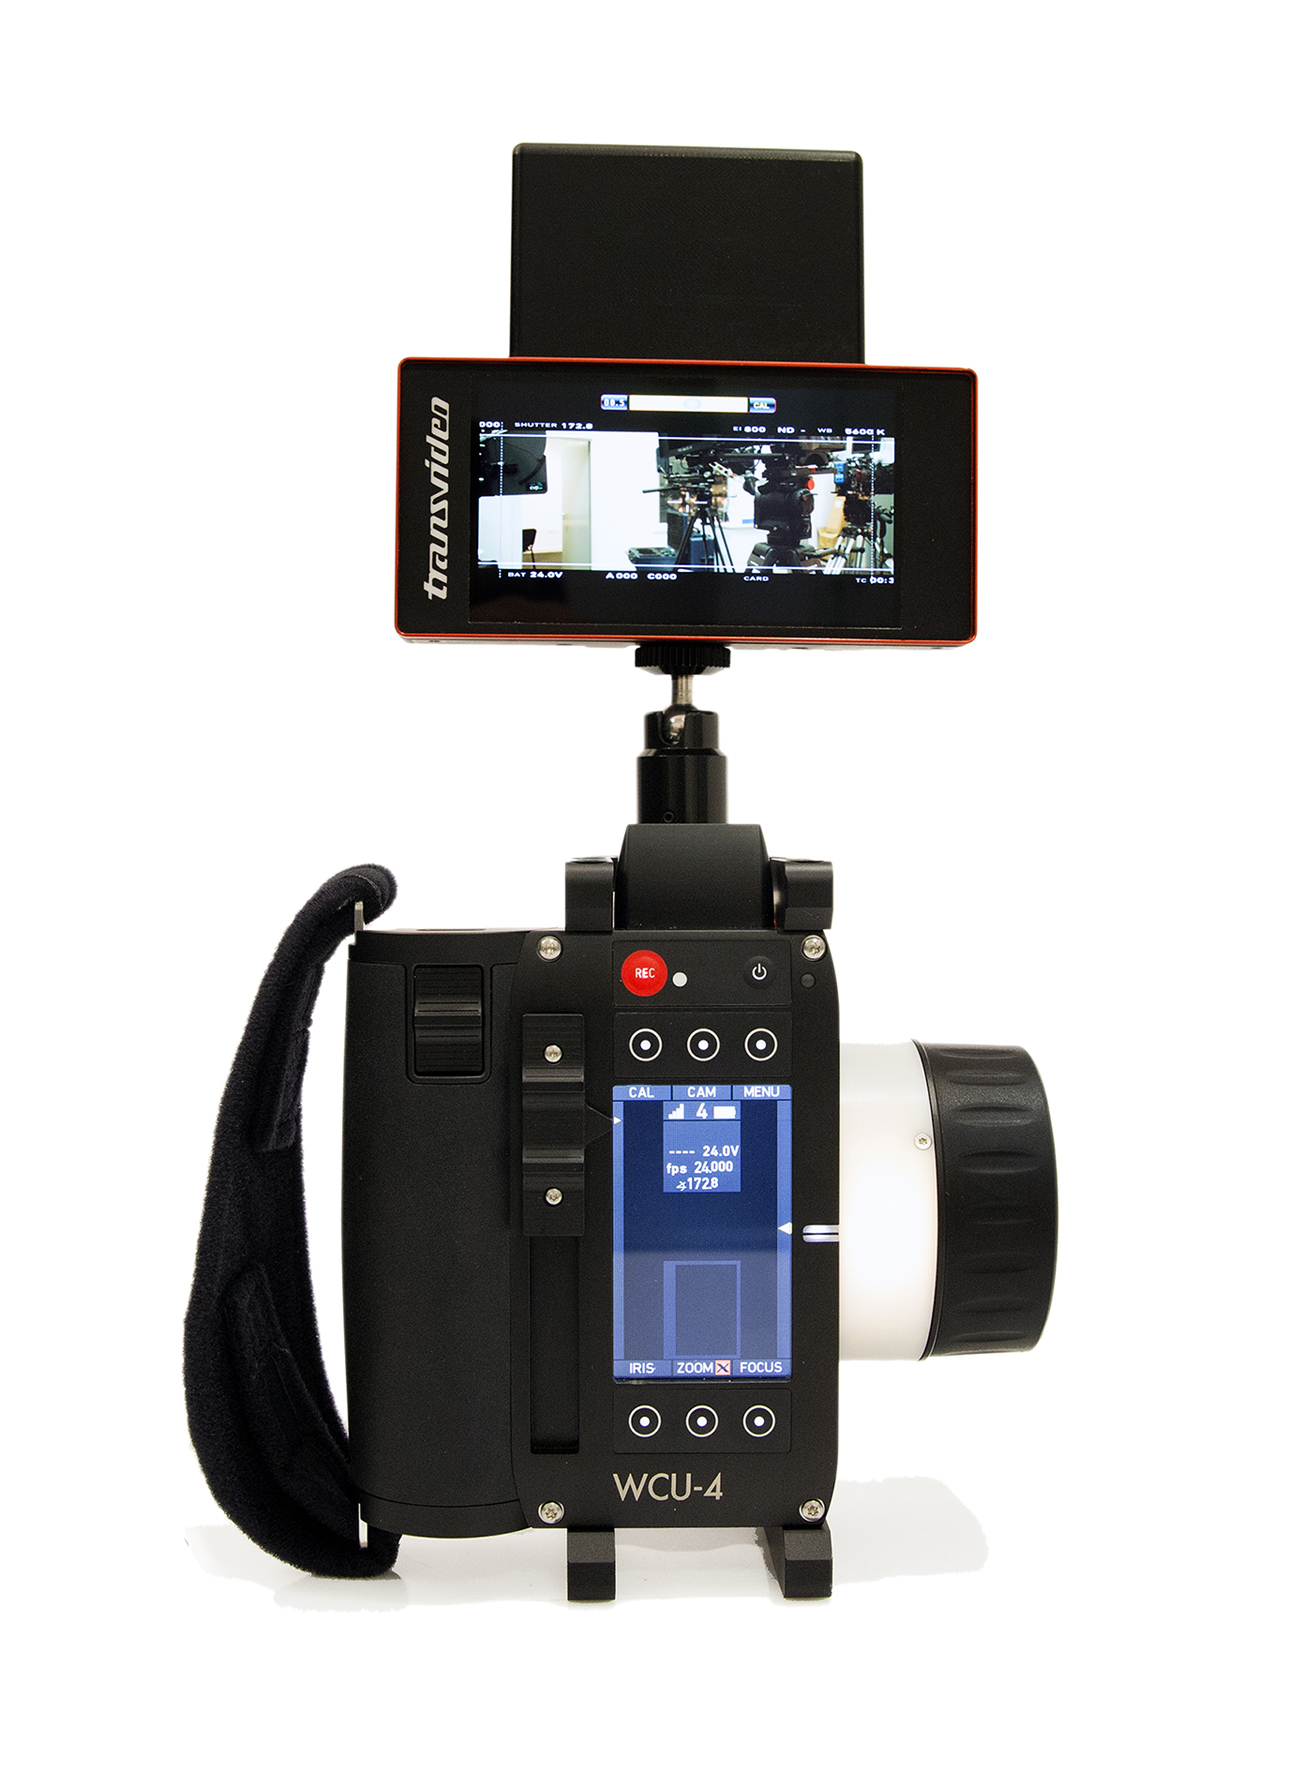 The-Transvideo-StarliteRF-monitor-recorder-mounted-on-the-ARRI-WCU-4-controller